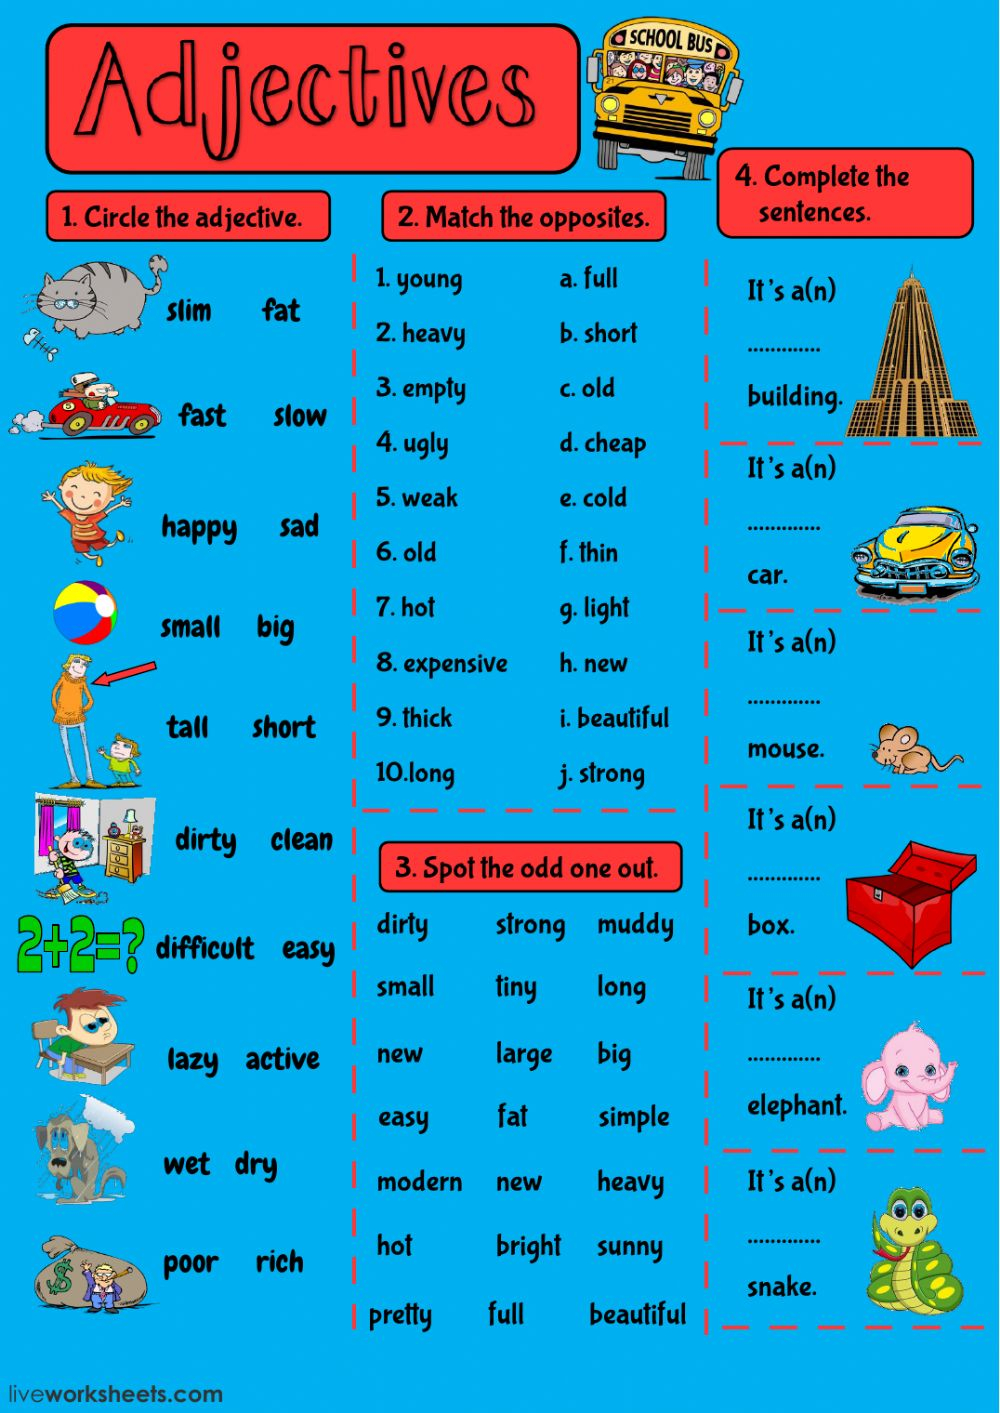 practice-with-adjectives-in-spanish-worksheet-answers